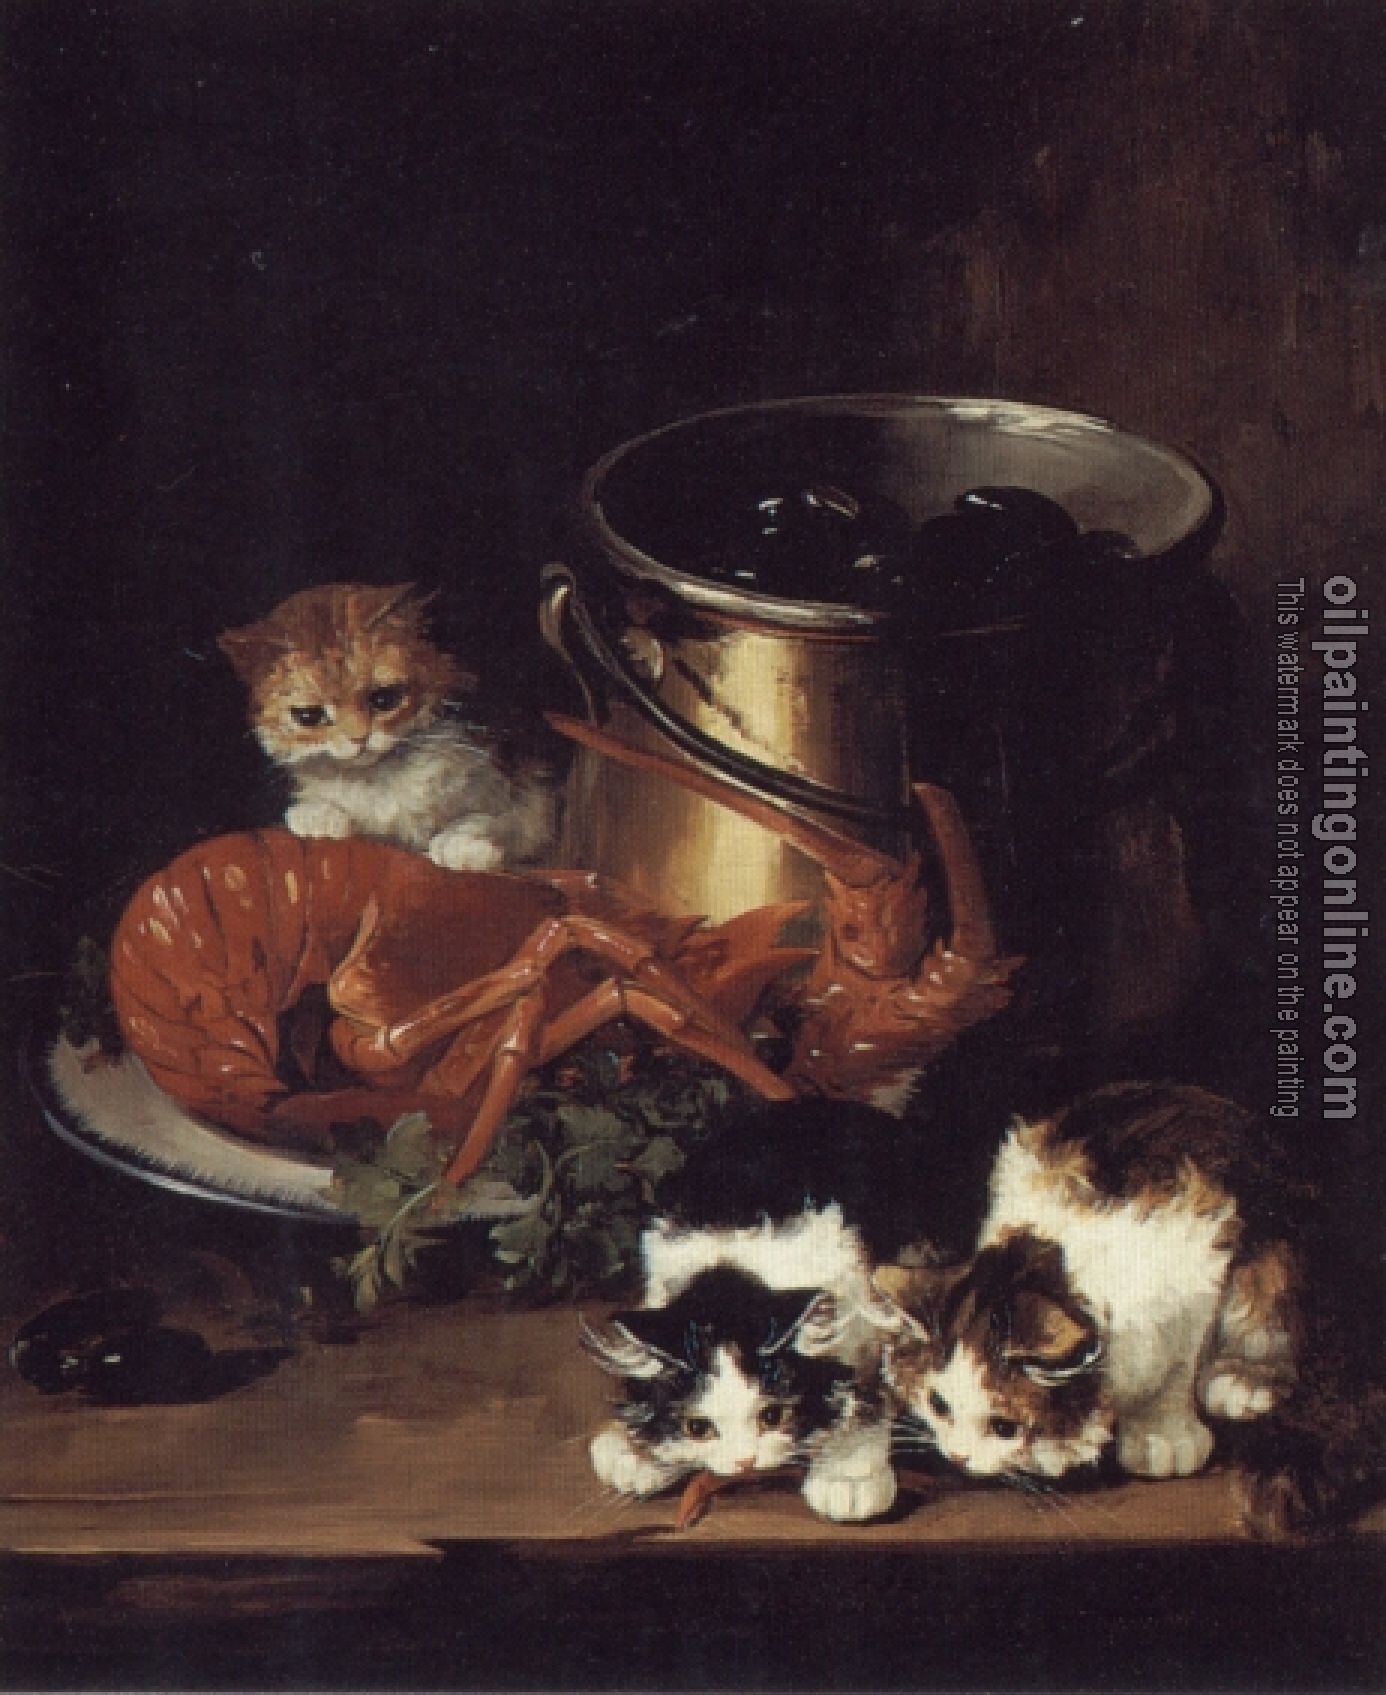 Neuville, Alfred Arthur Brunel de - Kittens with Mussels and a Lobster